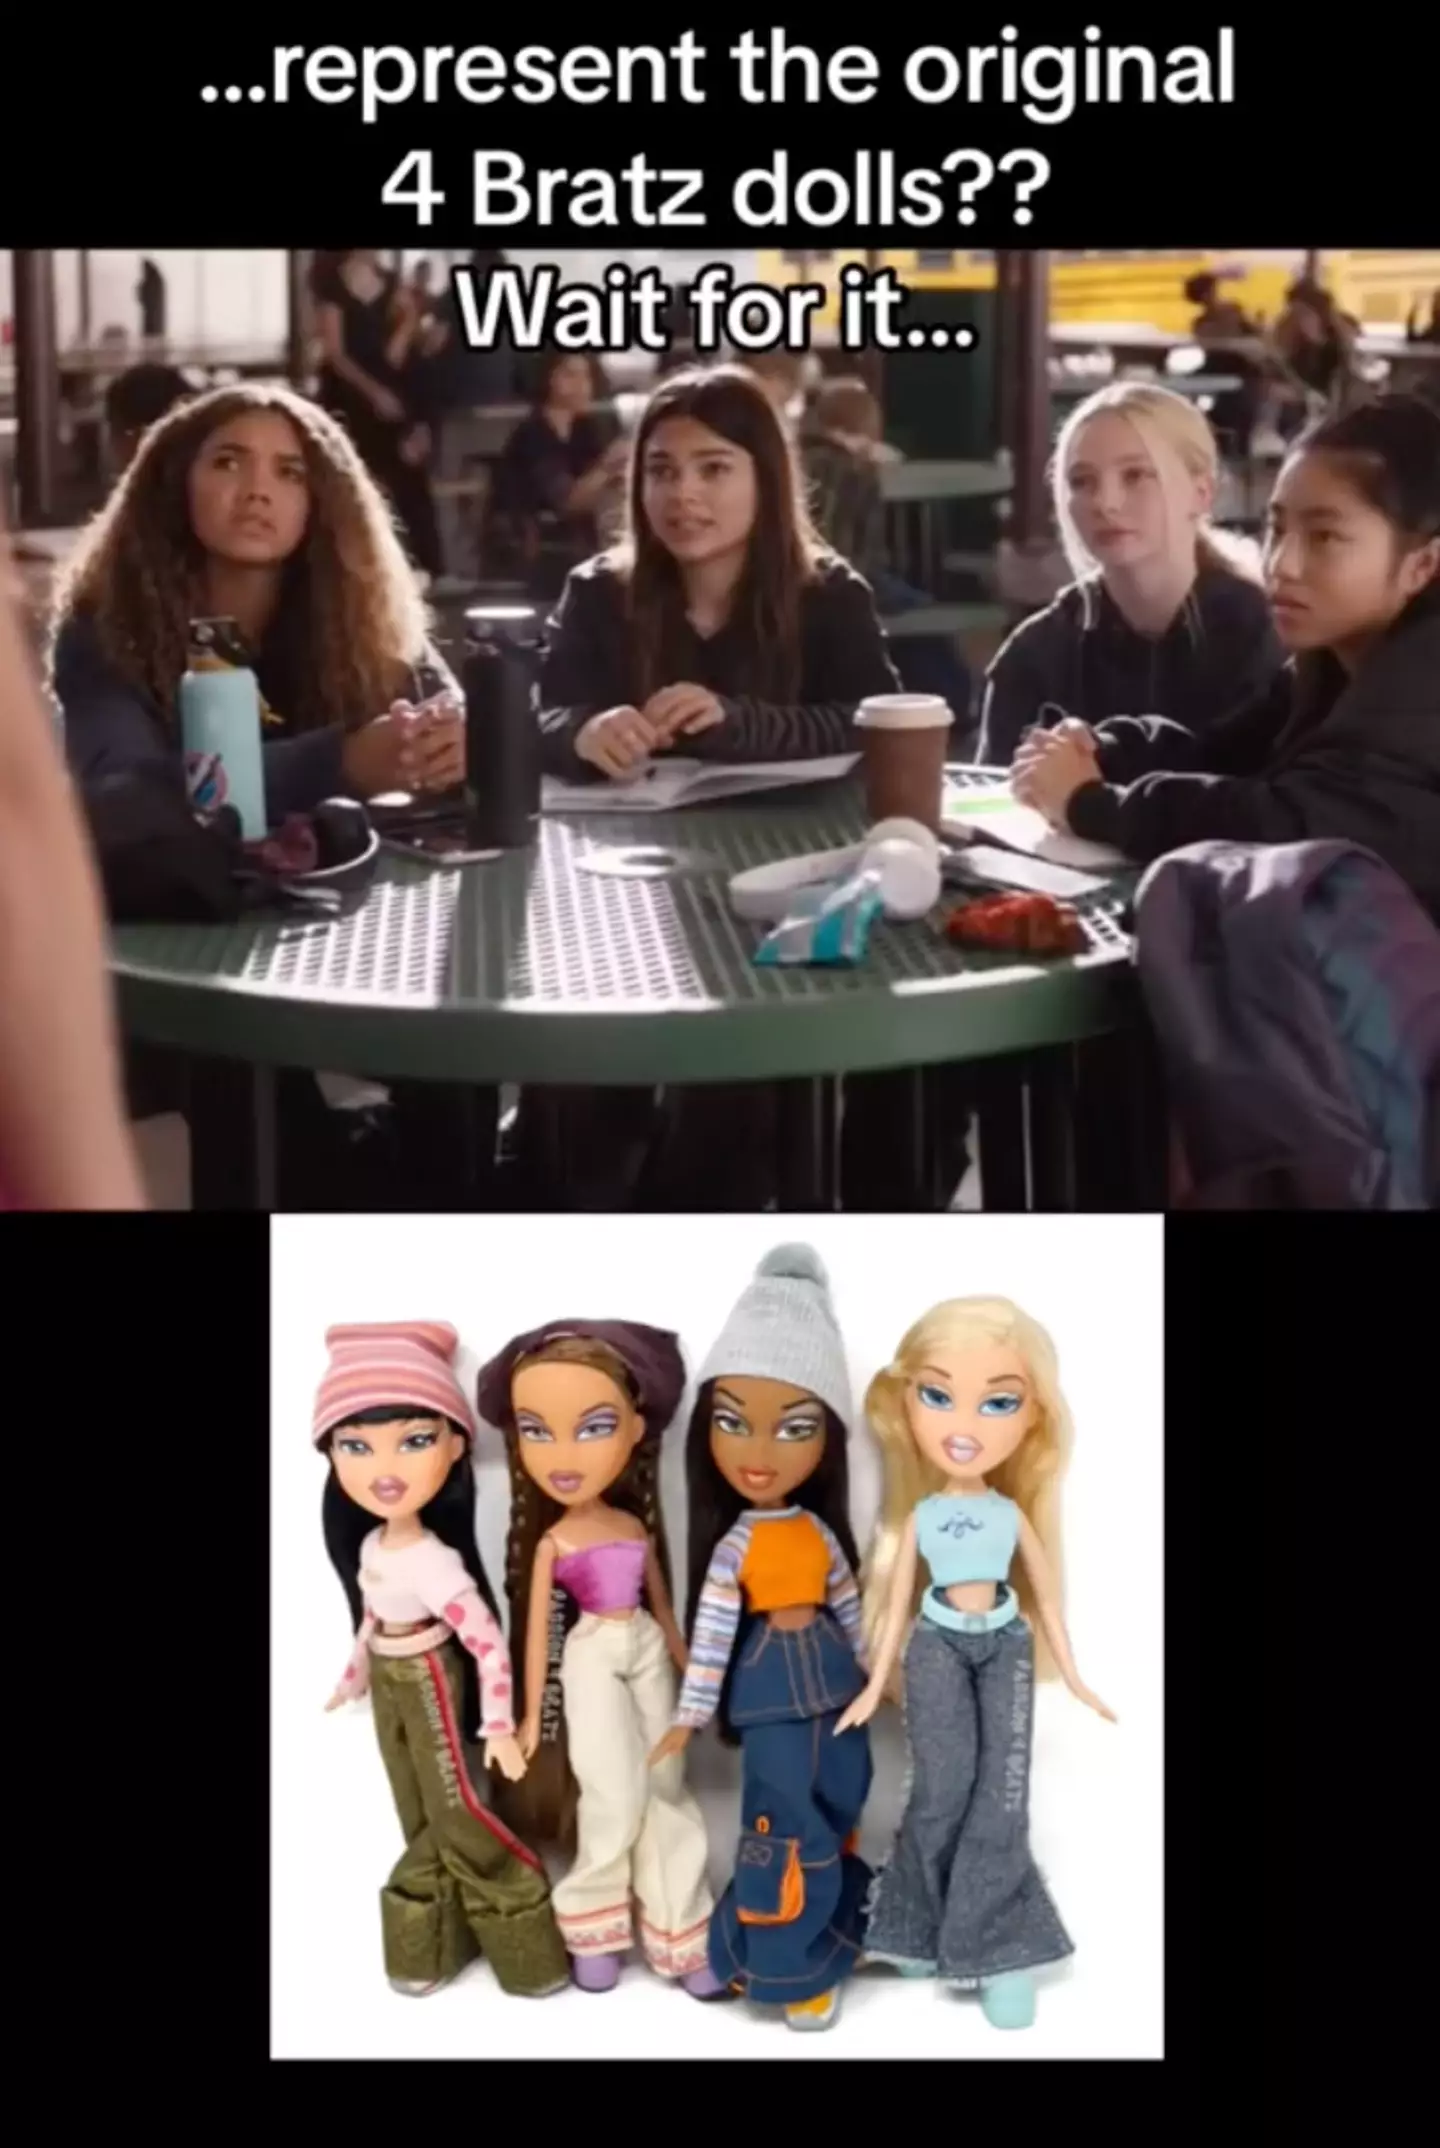 The high school students who don't like Barbie have the same names as the original four Bratz dolls.